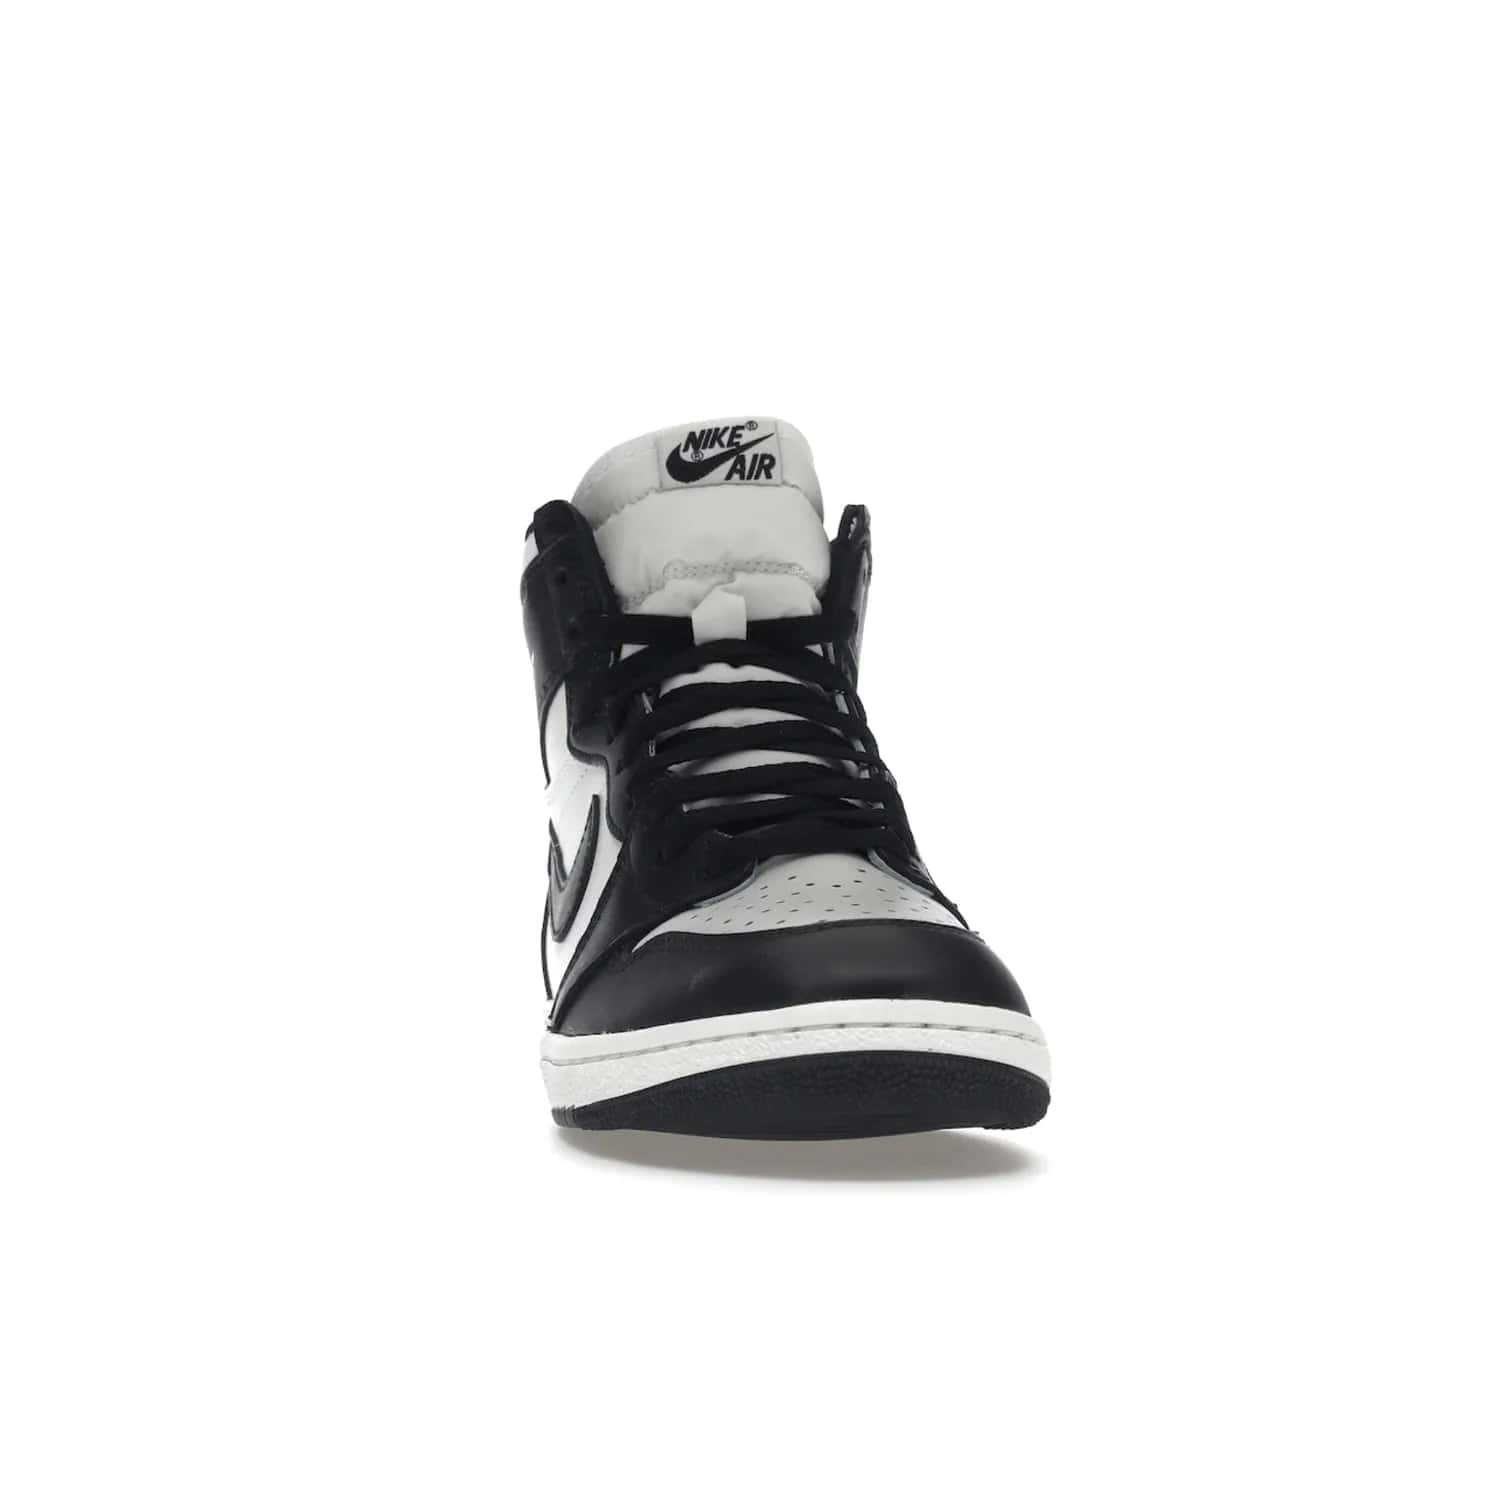 Jordan 1 Retro High 85 Black White (2023) - Image 9 - Only at www.BallersClubKickz.com - Brand new Jordan 1 Retro High 85 Black White (2023) now available. A classic color scheme of black and white leather uppers with signature Nike Air logo on the tongue. Must-have for any Air Jordan fan. Available February 15, 2023.